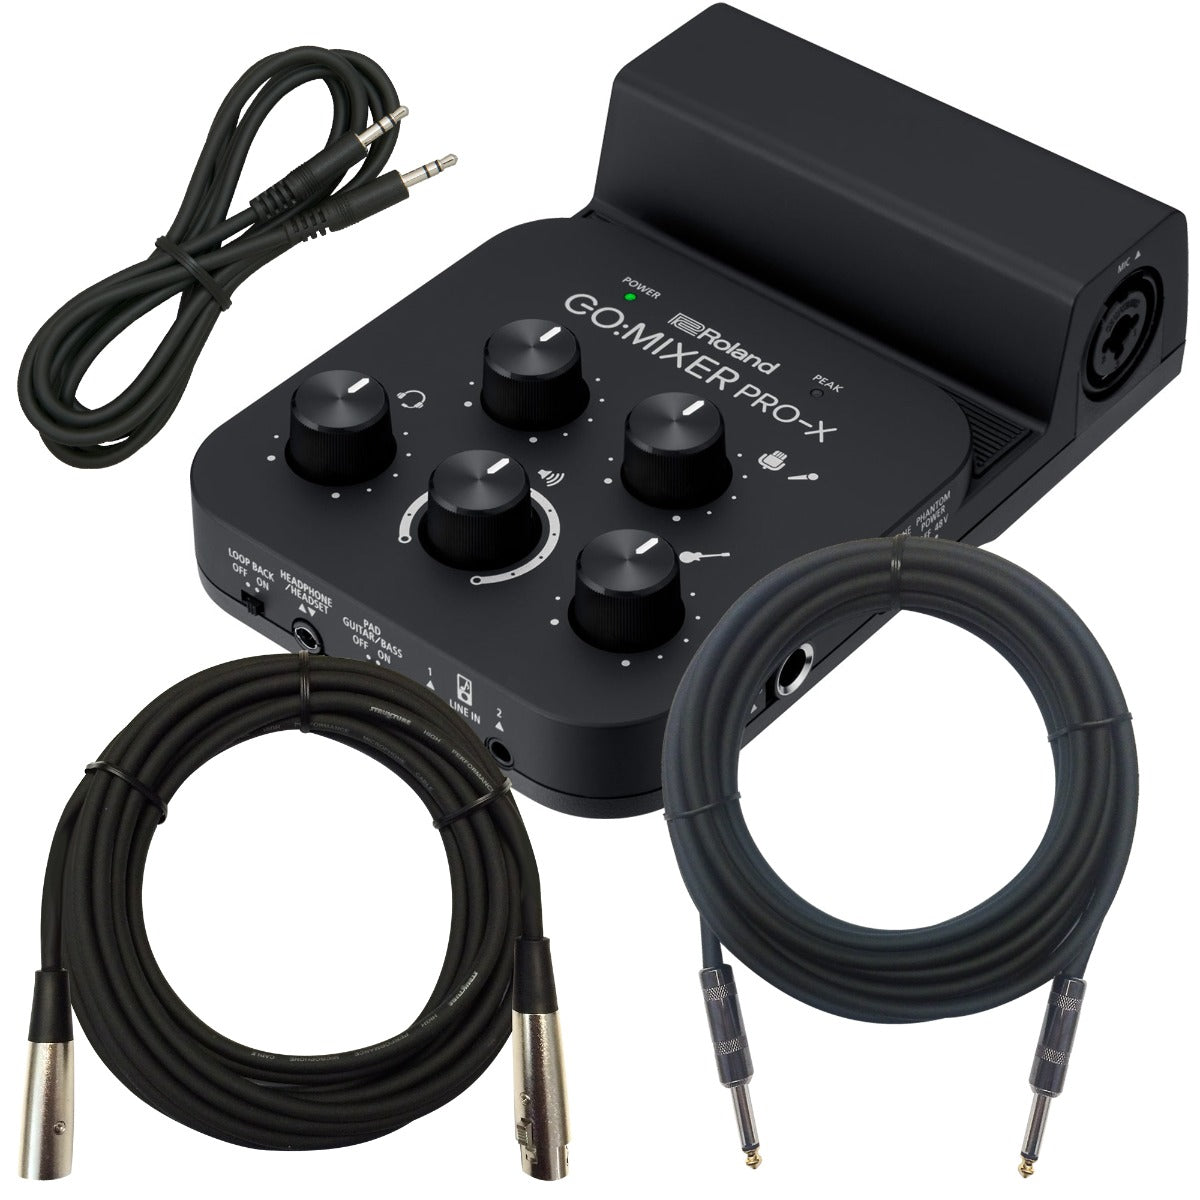 Collage of the components in the Roland Go:Mixer Pro-X Audio Mixer for Smartphones CABLE KIT bundle